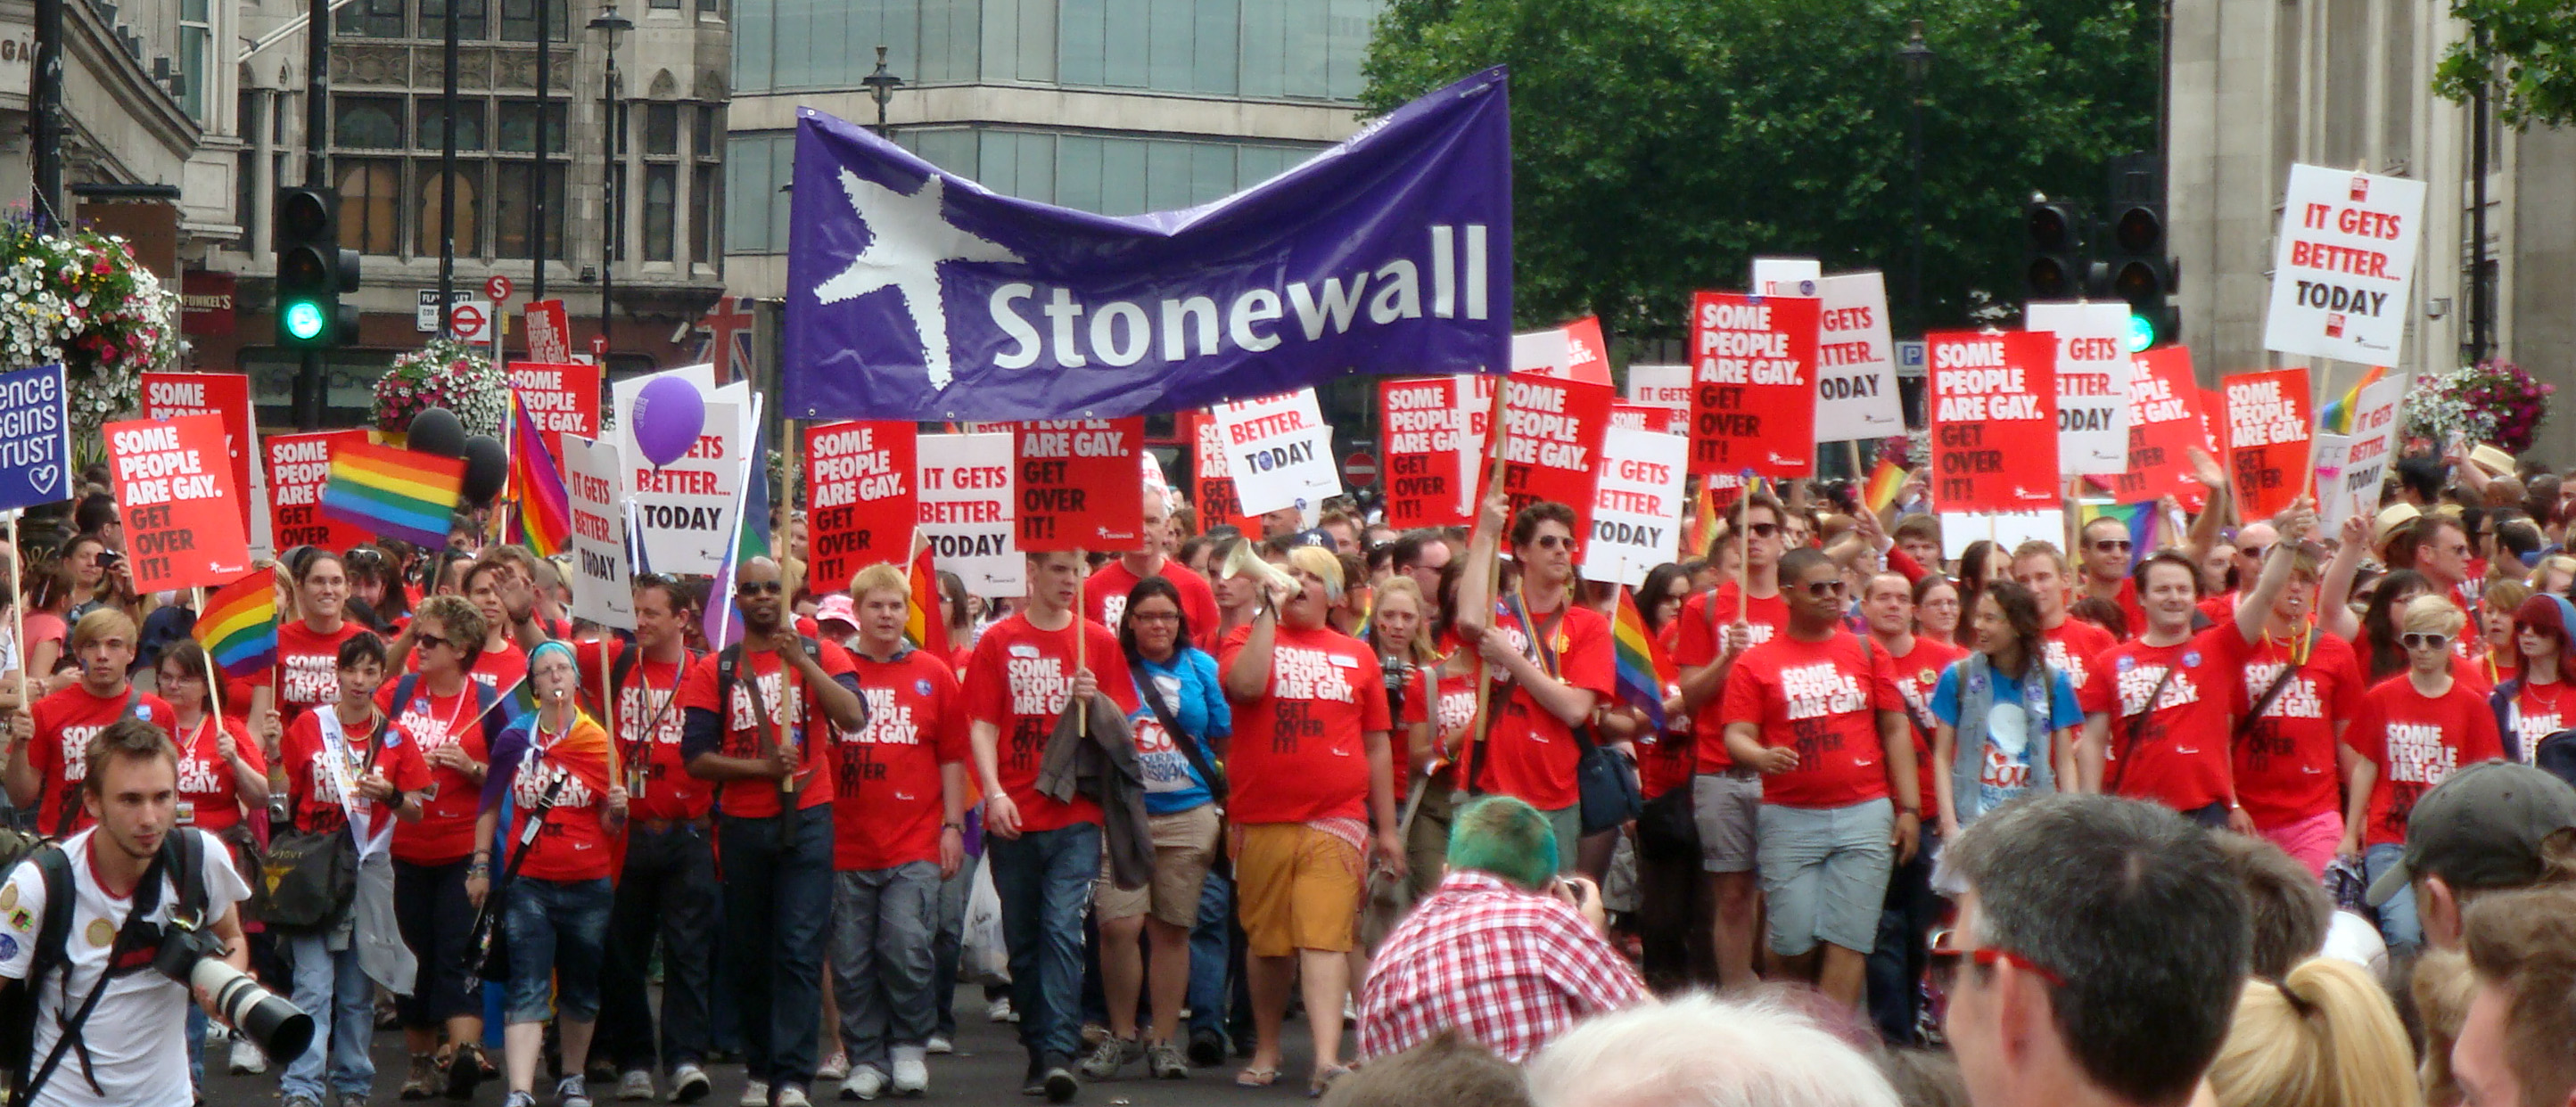 Stonewall UK to start campaigning for trans* rights